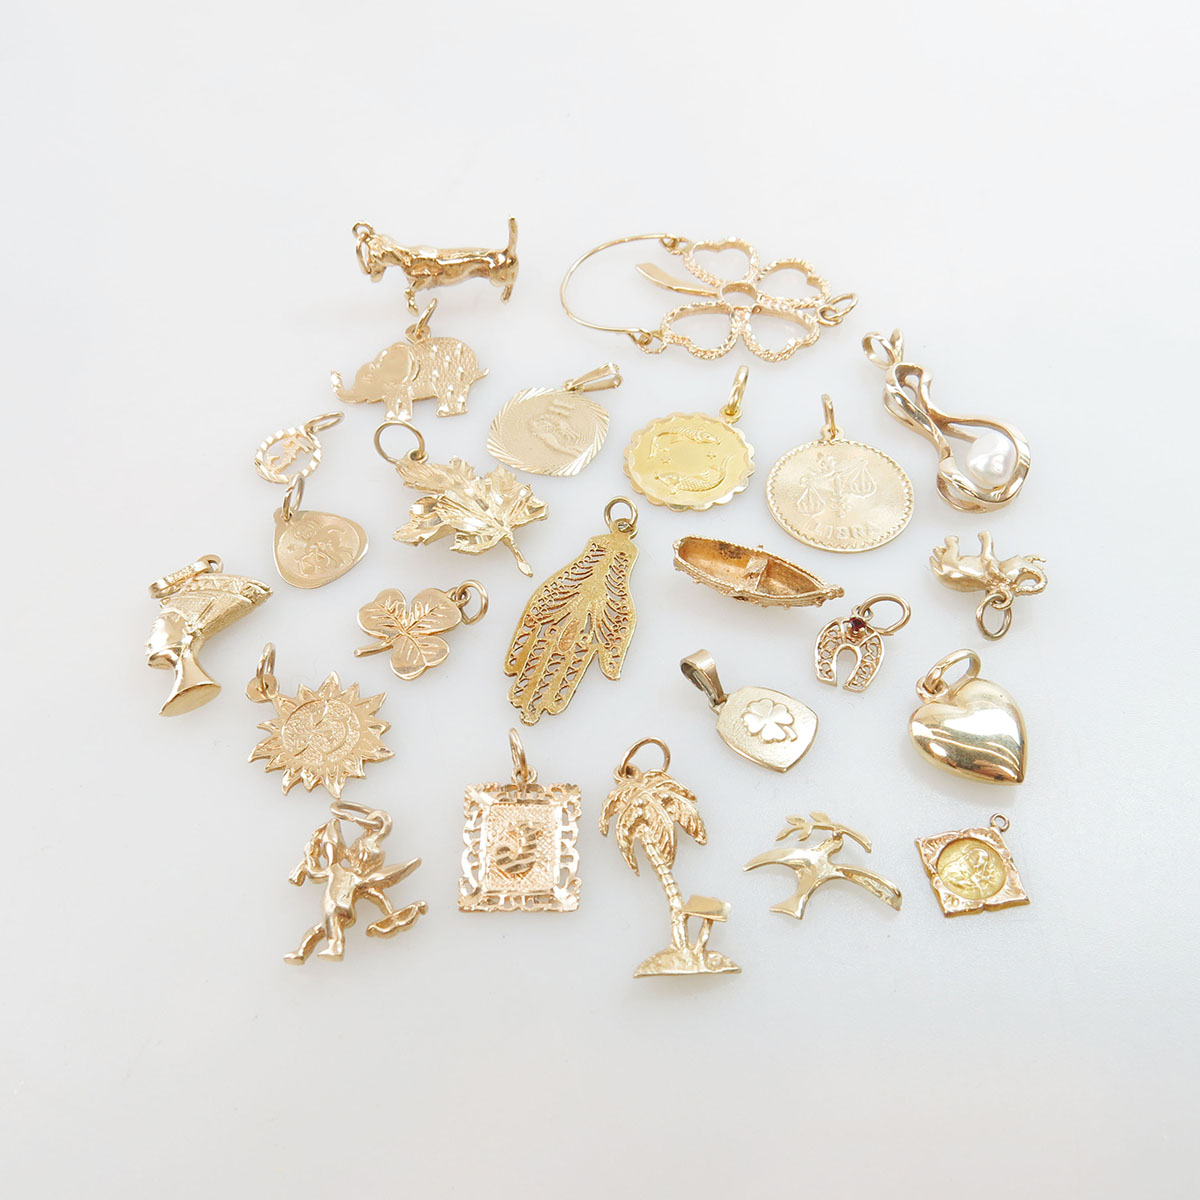 24 Various Gold Charms And Pendants